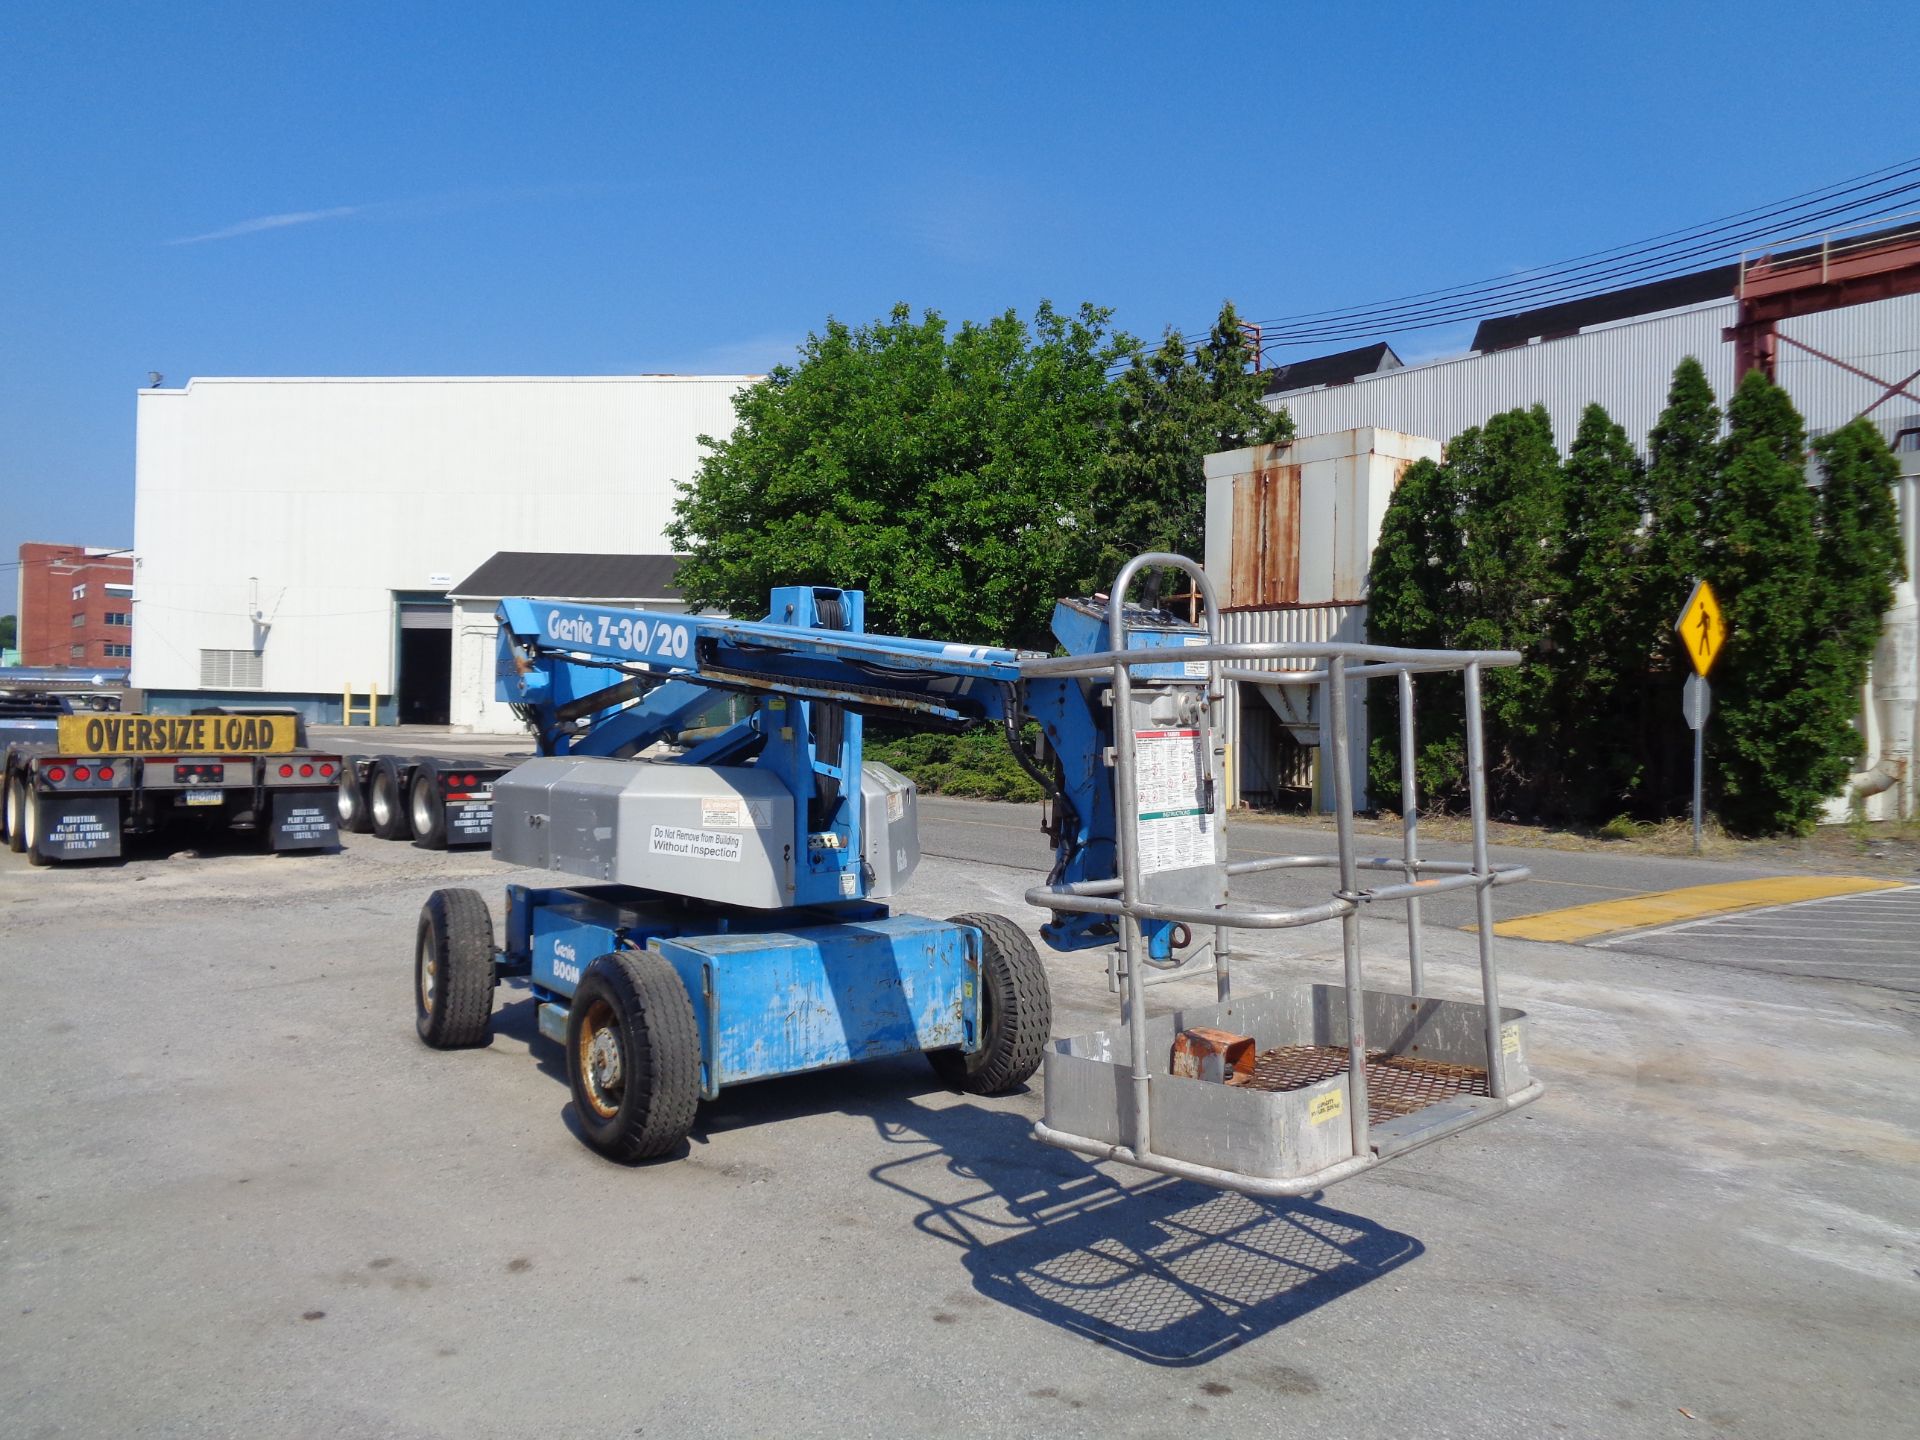 Genie Z30/20 Electric Articulating Boom Lift - 30ft Height - Image 9 of 12